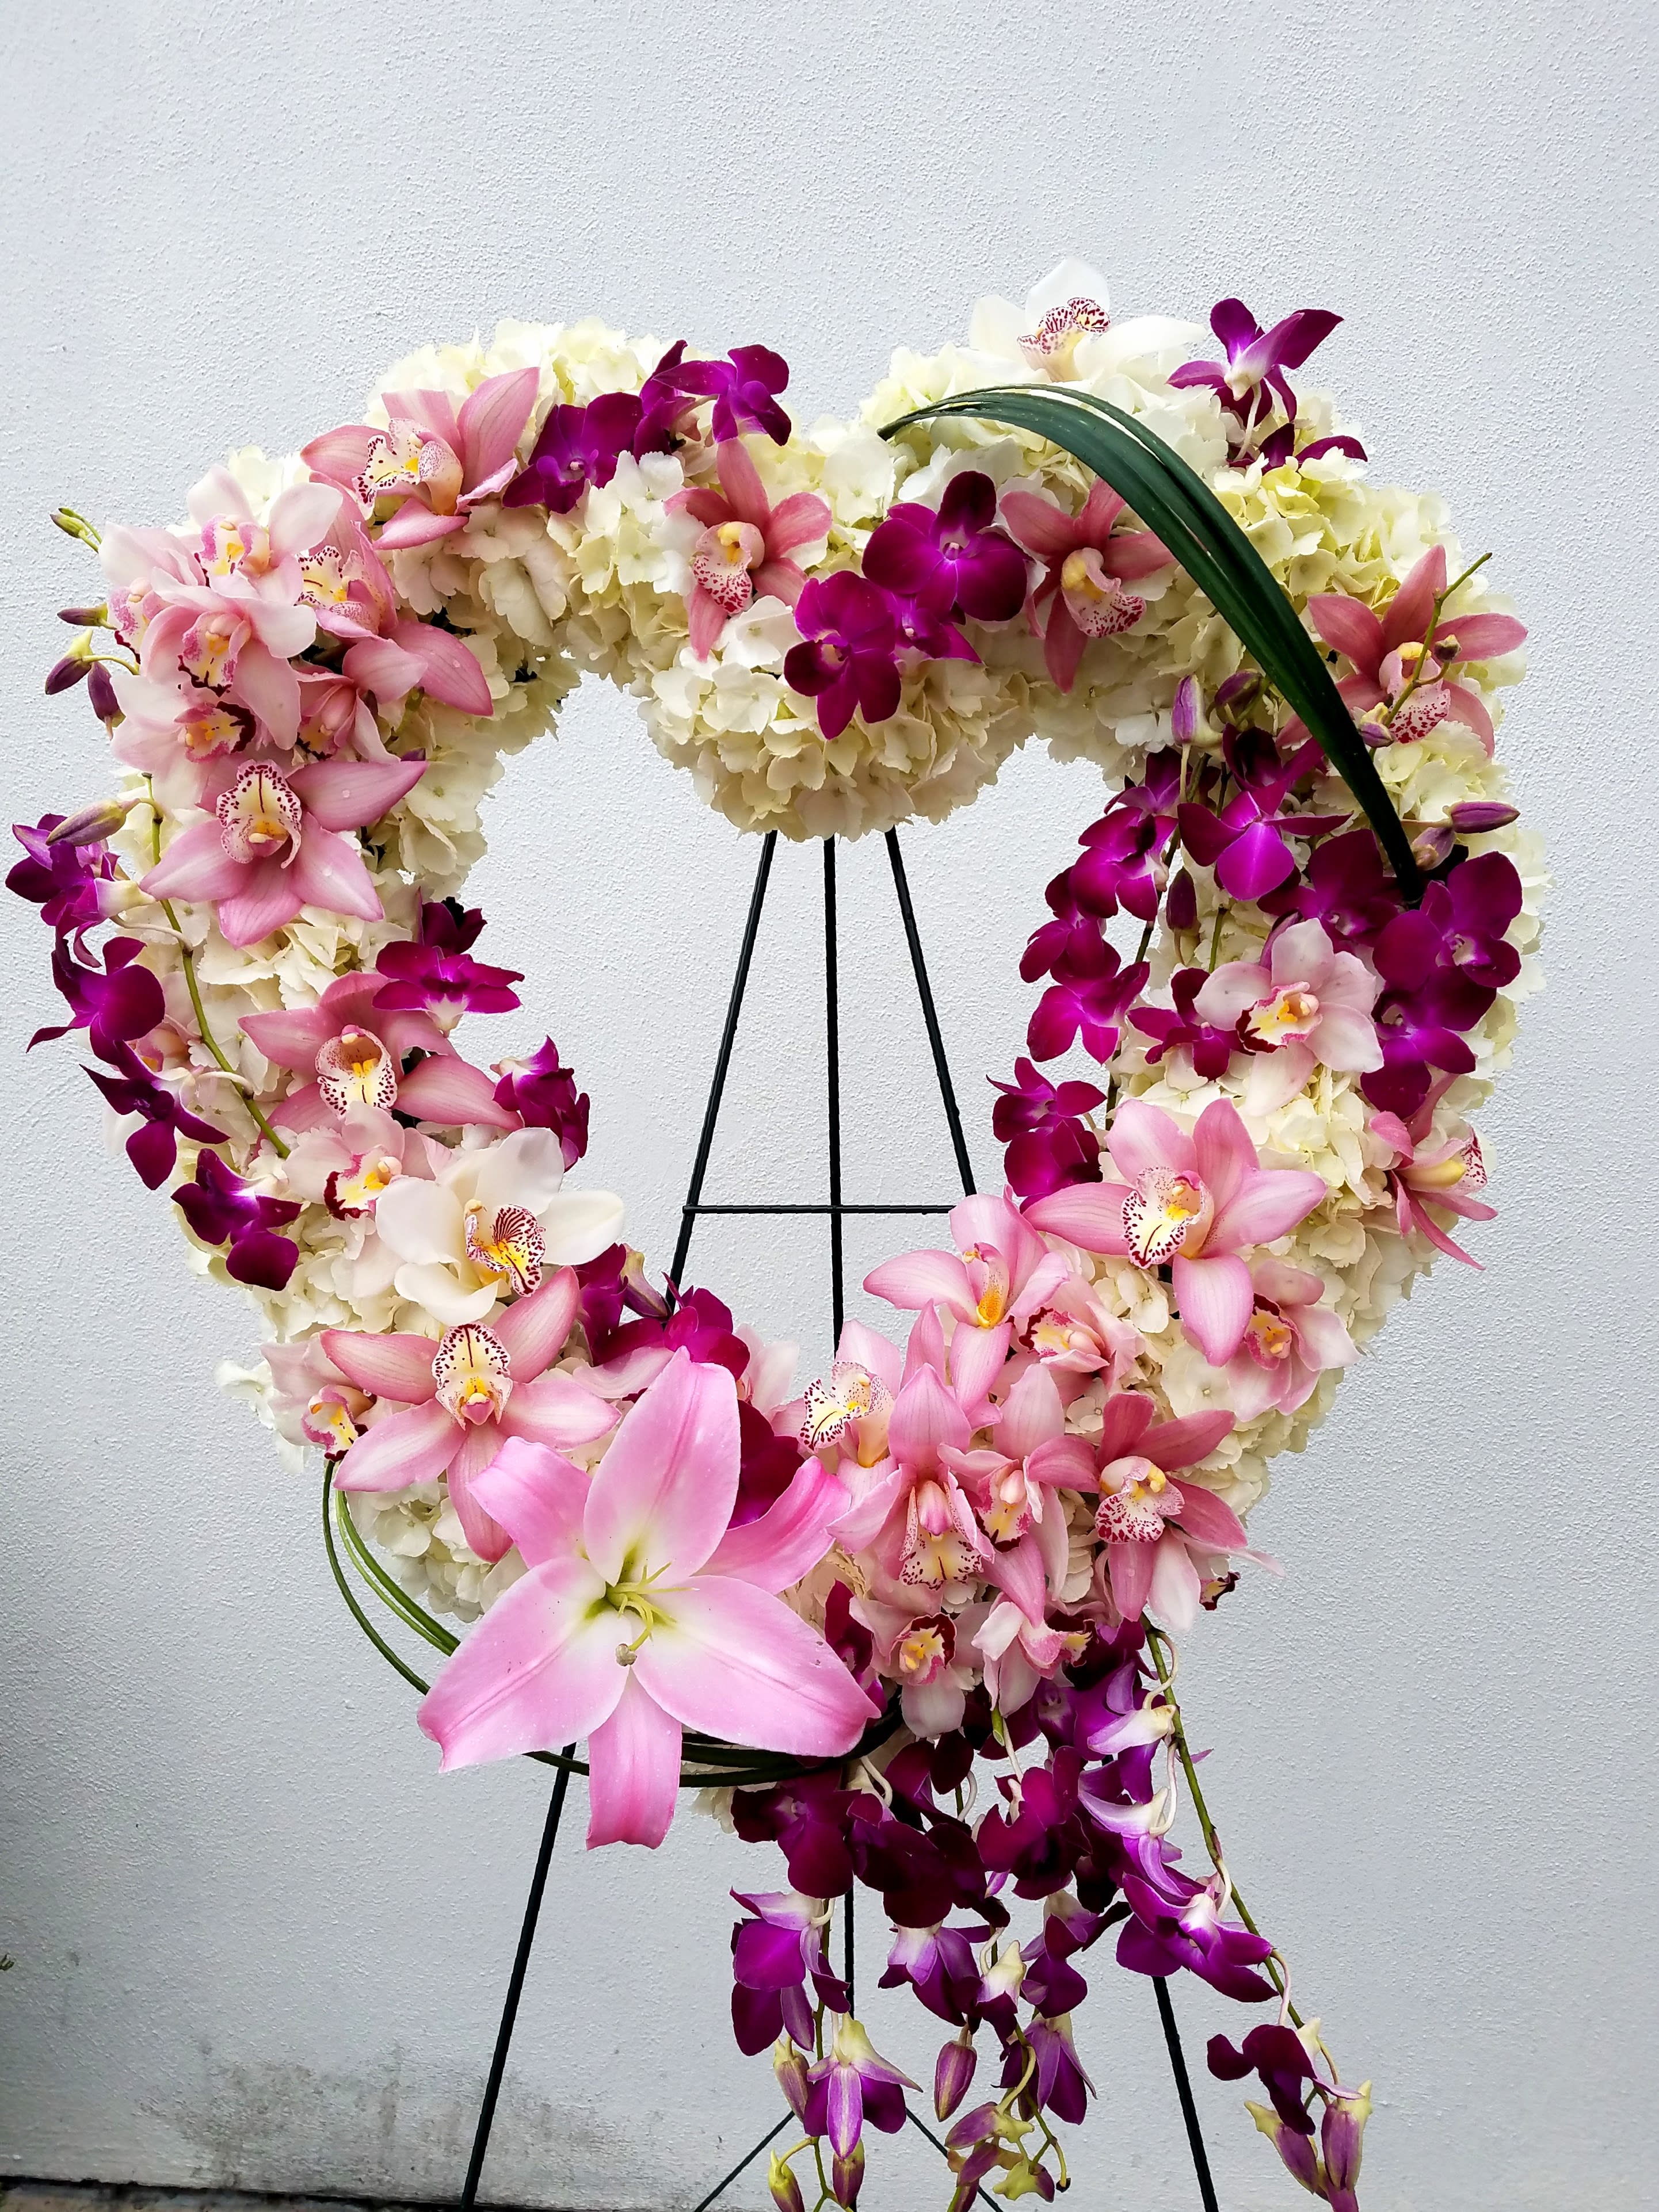 Heart of Love - A gorgeous large display of cymbidium orchids and hydrangeas.  